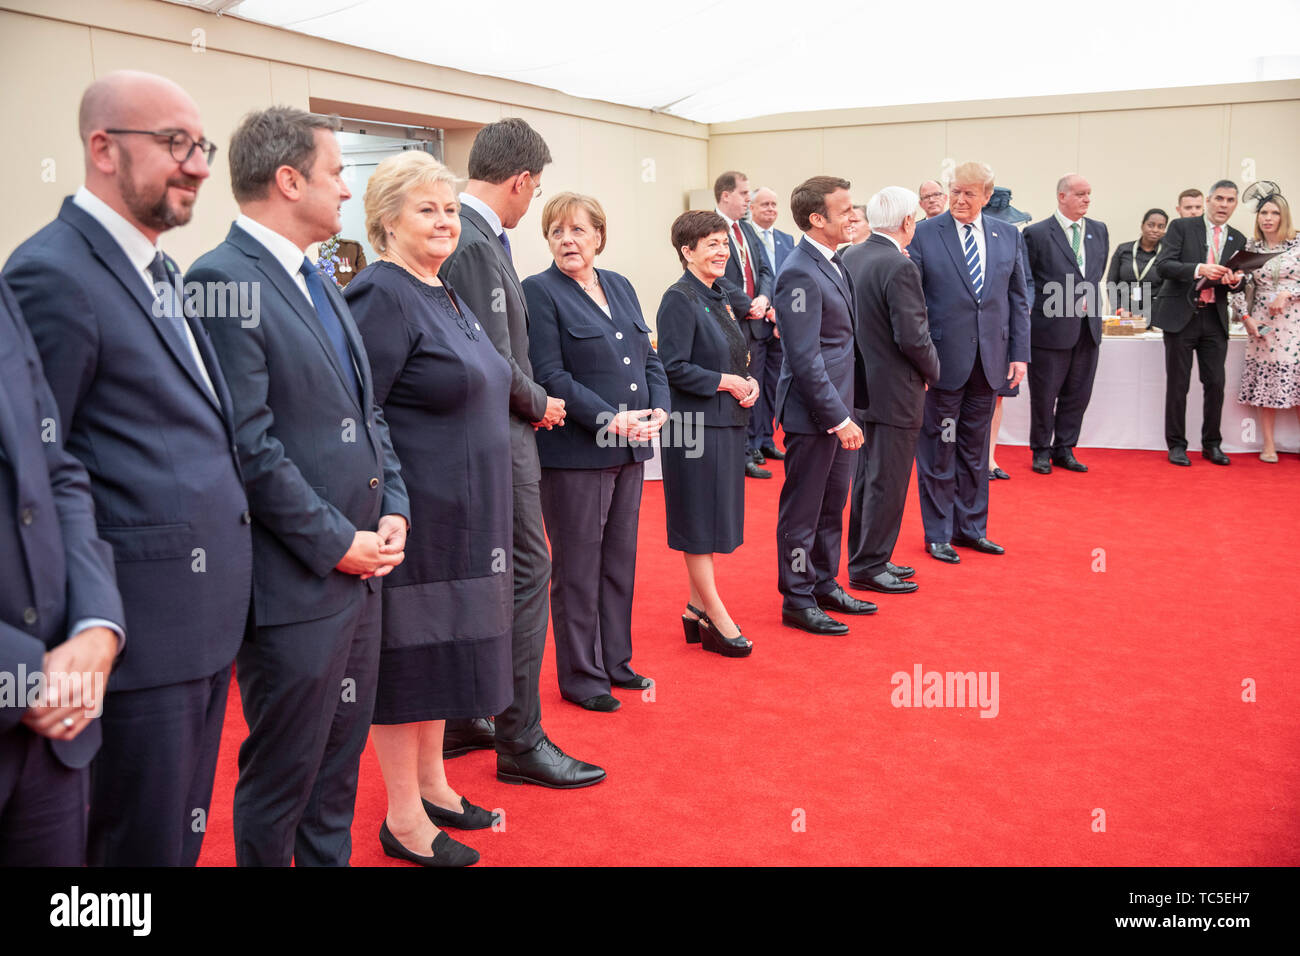 (left to right) Prime Minister of Belgium Charles Michel, Prime Minister of Luxembourg Xavier Bettel, Prime Minister of of Norway Erna Solberg, Prime Minister of the Netherlands Mark Rutte, German Chancellor Angela Merkel, Governor-General of New Zealand Patsy Reddy, President of France Emmanuel Macron, President of Greece Prokopis Pavlopoulos and US President Donald Trump, ahead of a meeting of leaders the Allied Nations at the 75th Anniversary of the D-Day landings at Southsea Common, Portsmouth. Stock Photo